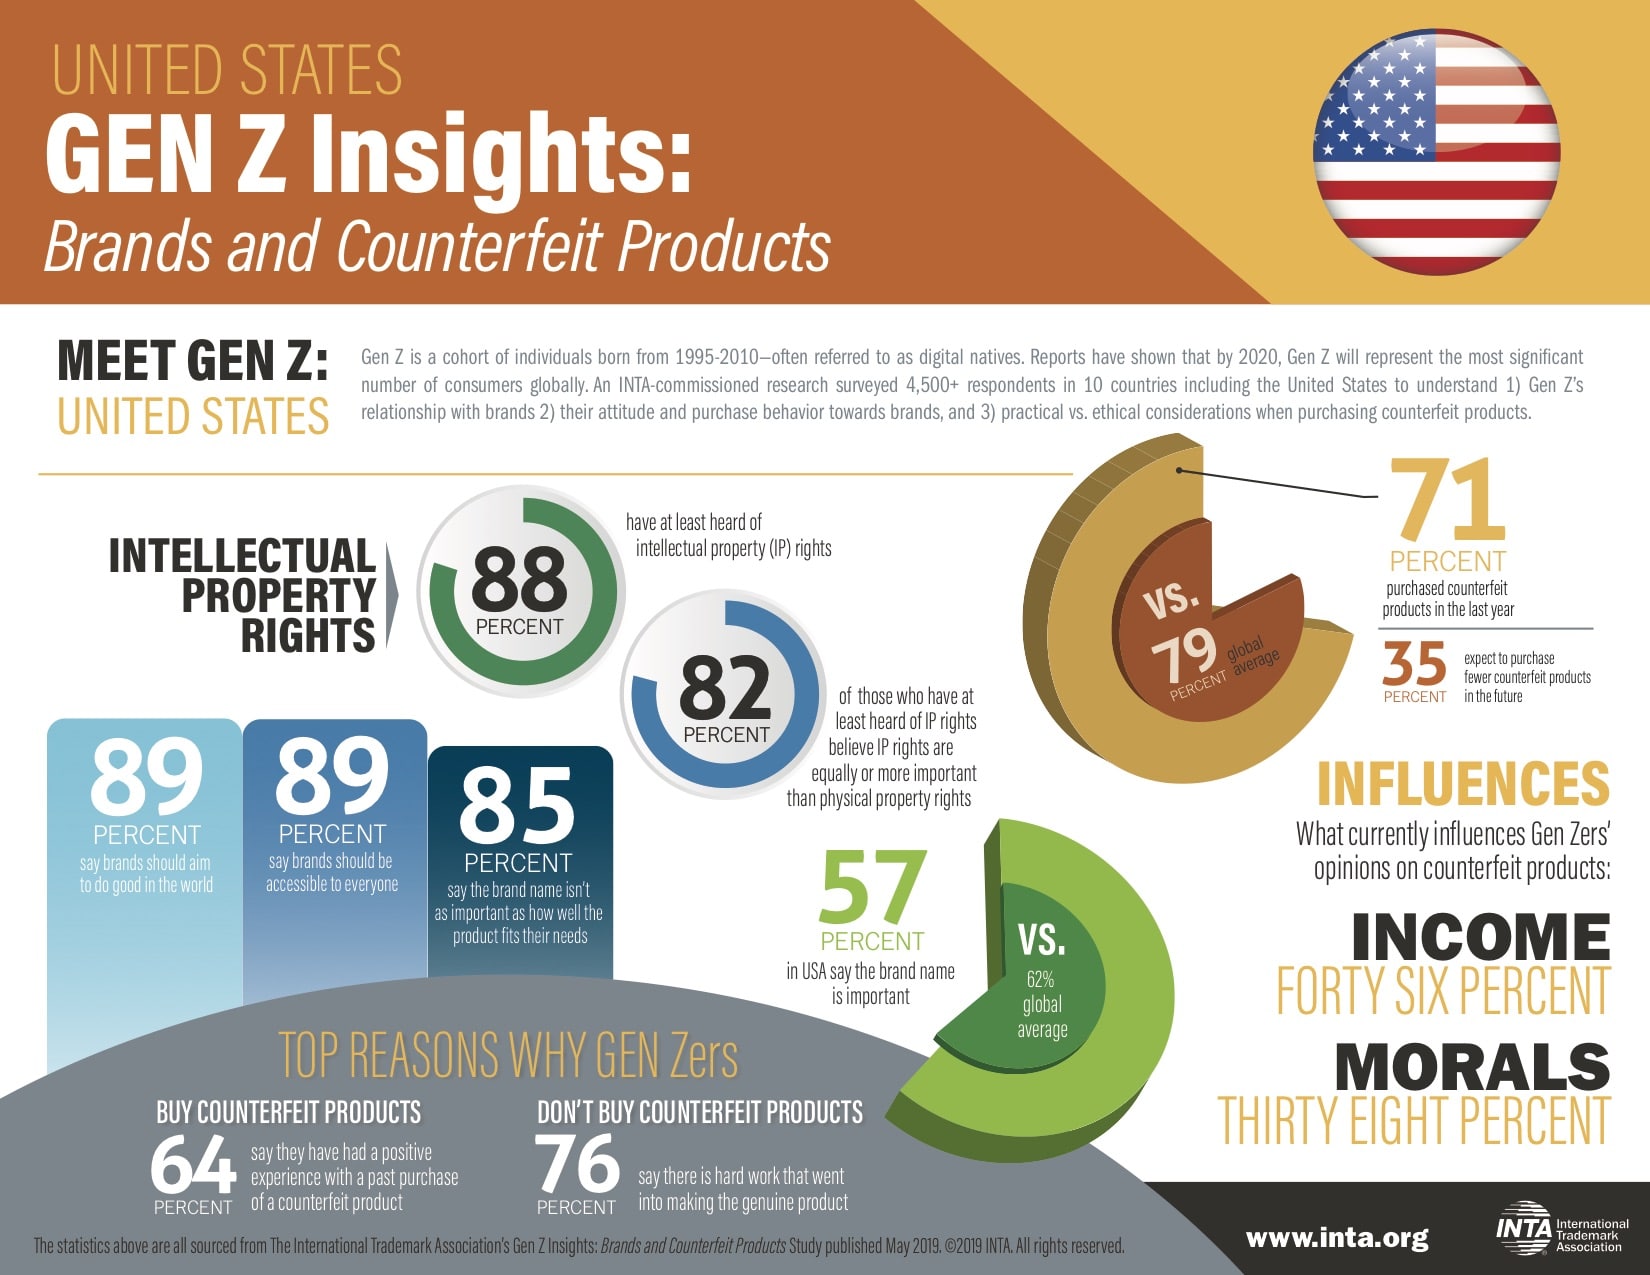 New global counterfeit-product study puts Gen Z’s moral compass to the test